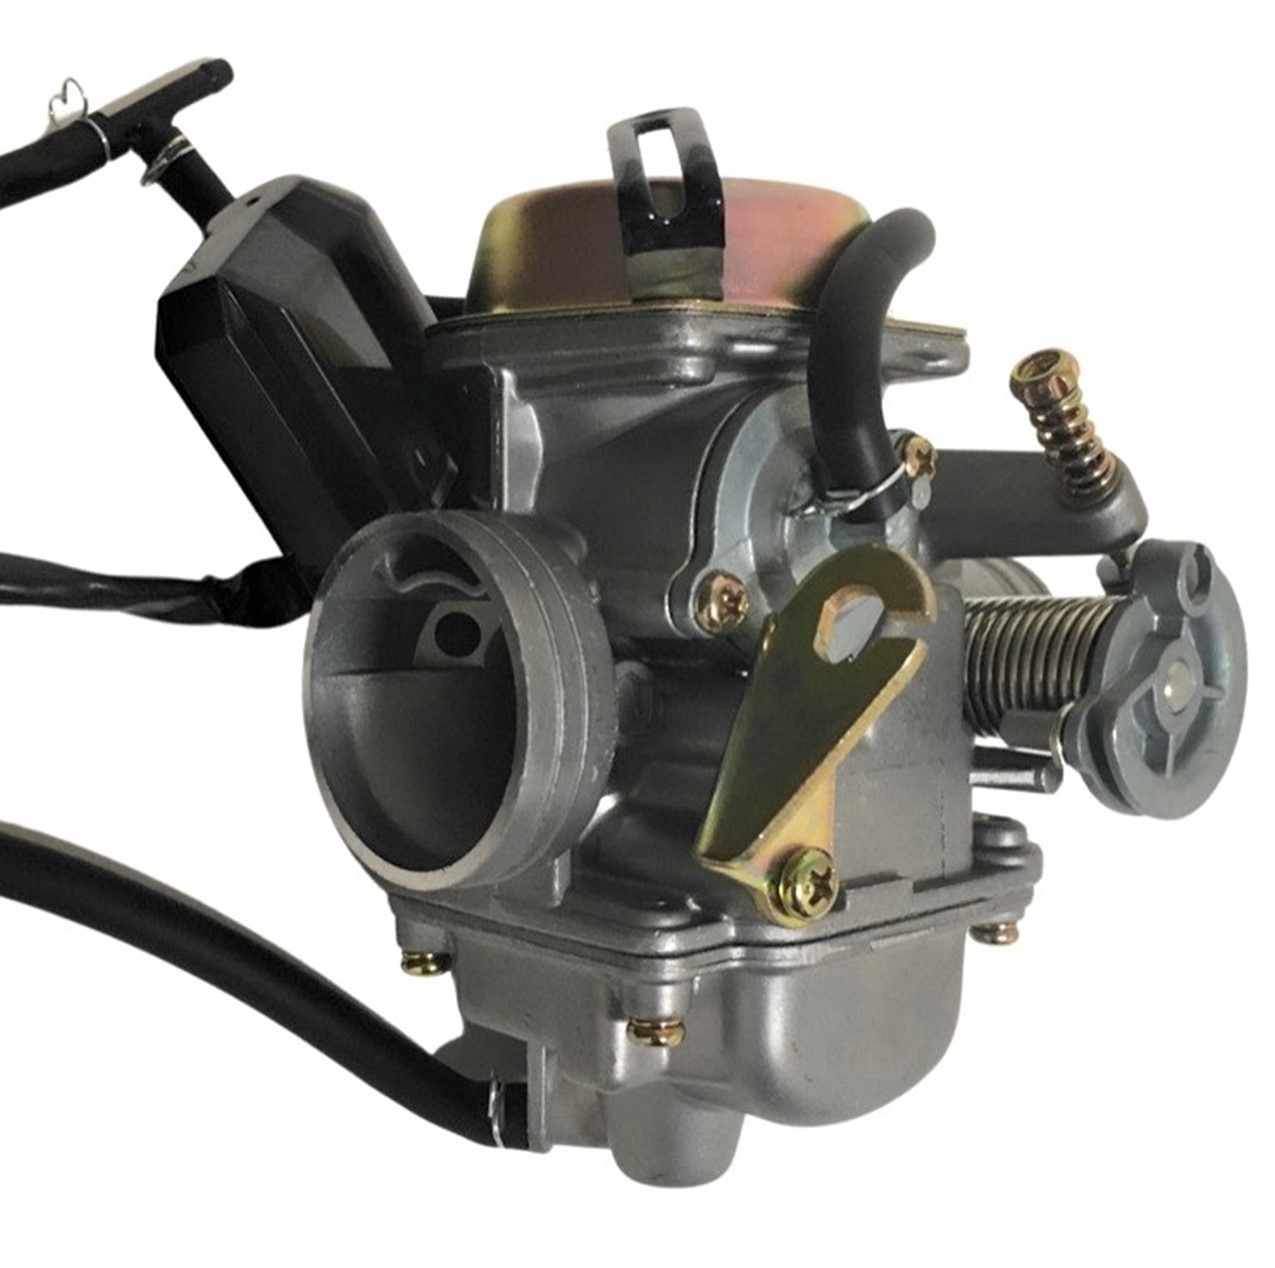 Keihin Type PD24J Carburetor TOP QUALITY-Best Value Intake OD=32mm Air Box OD=42mm Fits Most GY6 125, 150, 180cc ATV, GoKarts, Motorcycles, Scooters